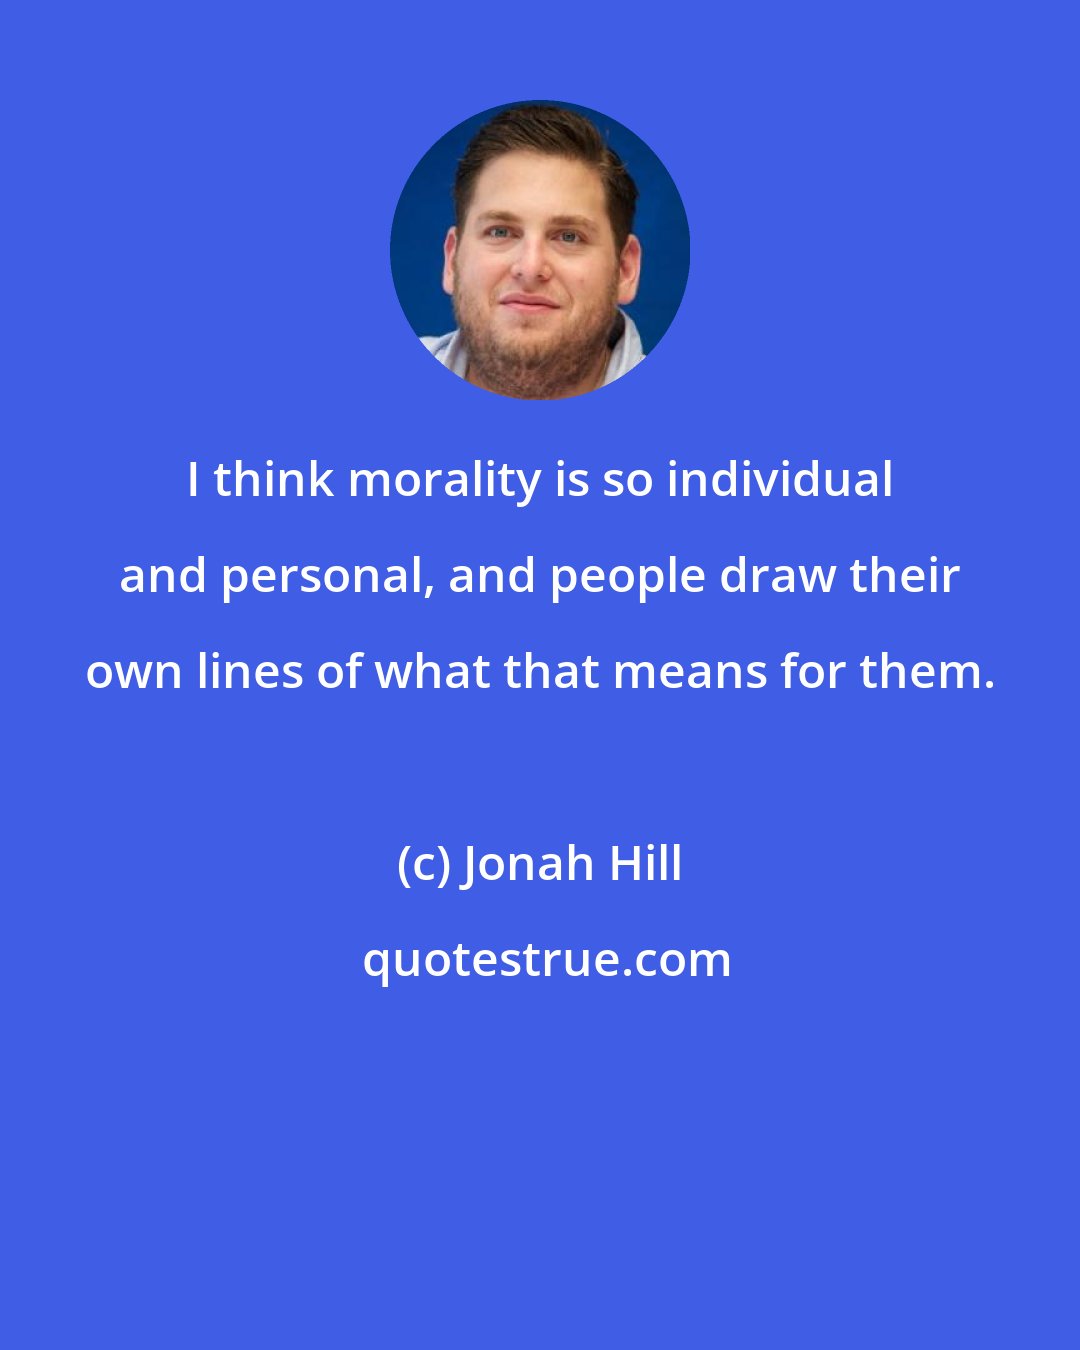 Jonah Hill: I think morality is so individual and personal, and people draw their own lines of what that means for them.